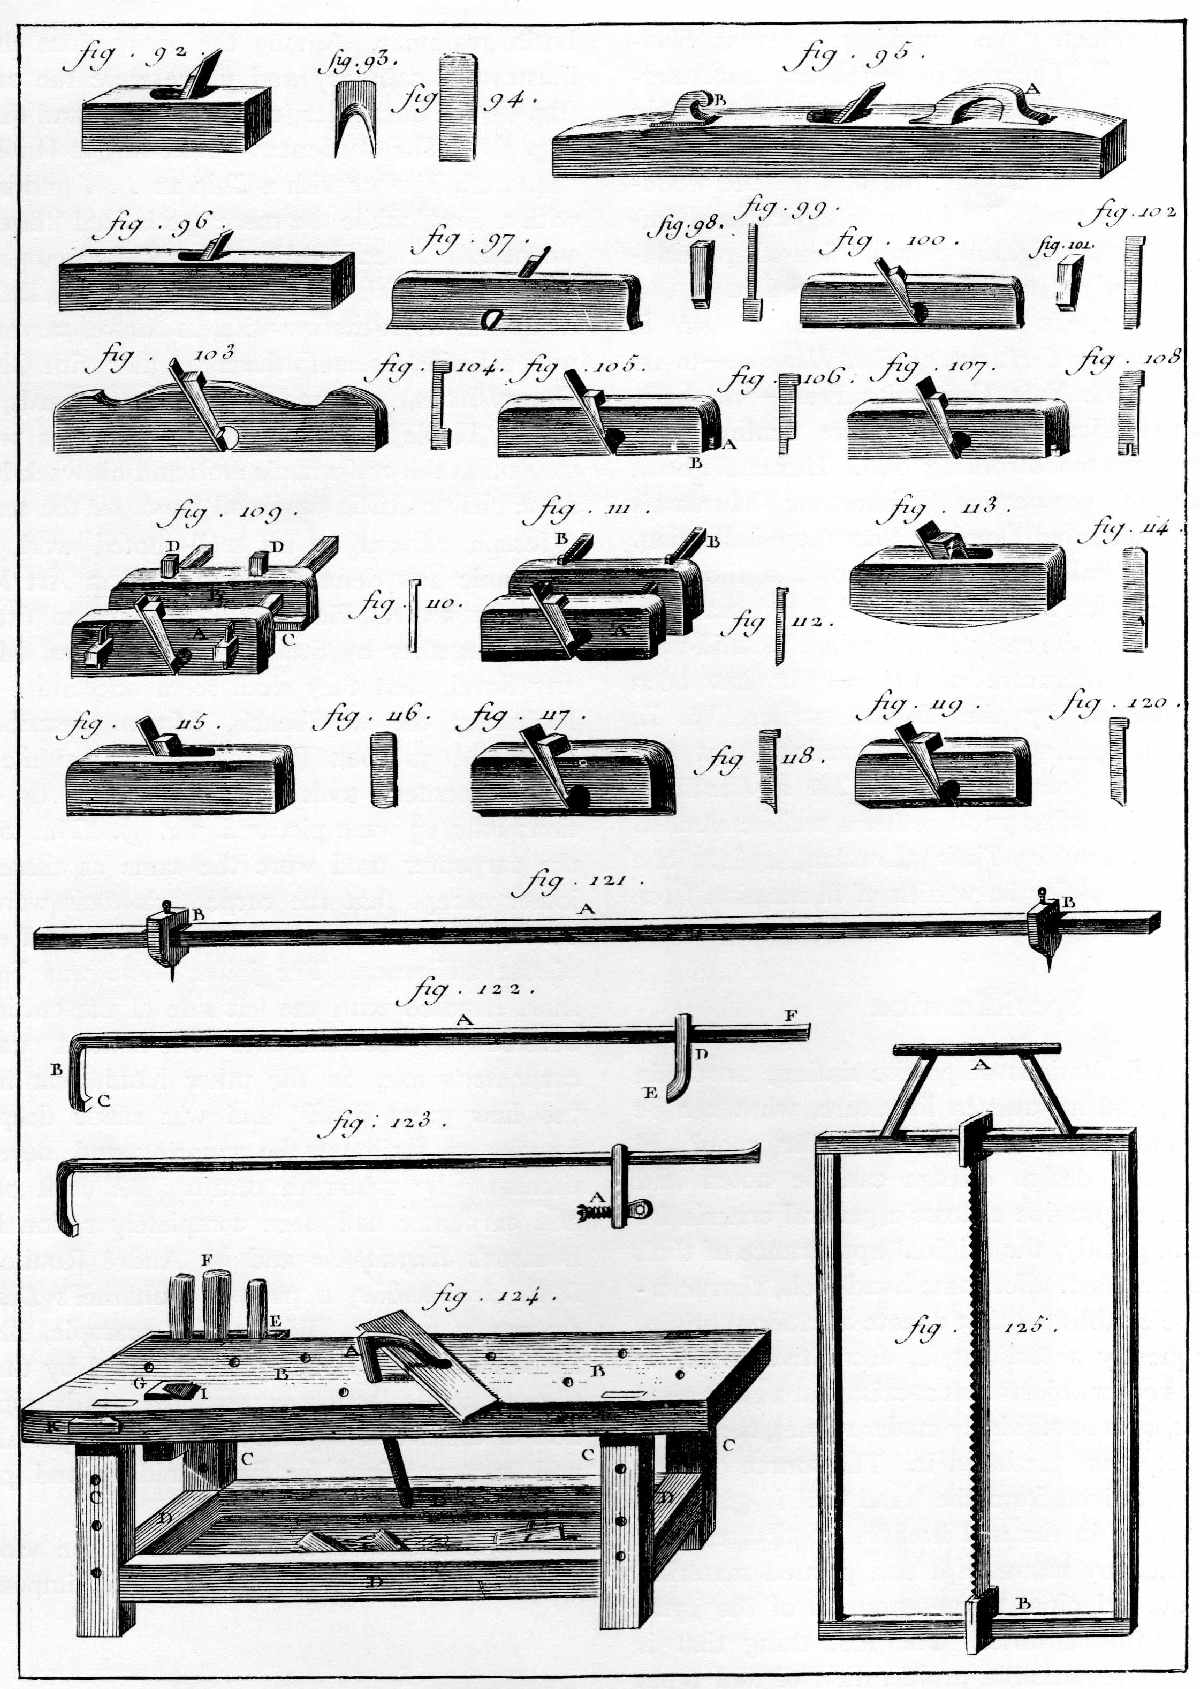 The Project Gutenberg eBook of Woodworking Tools, 1600 ...